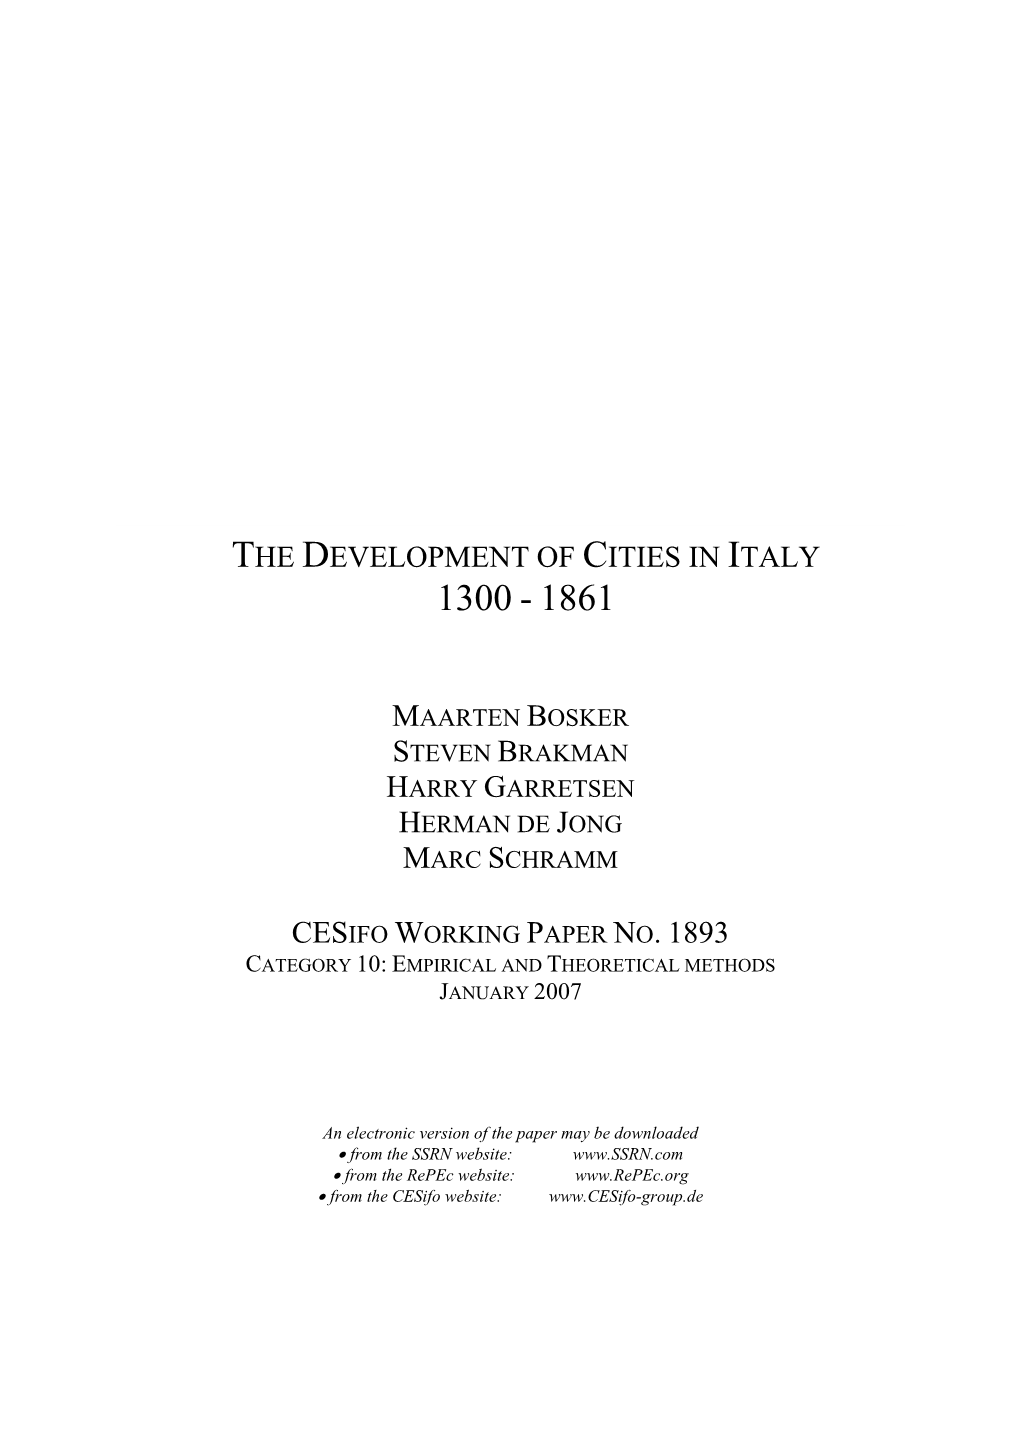 The Development of Cities in Italy 1300 - 1861